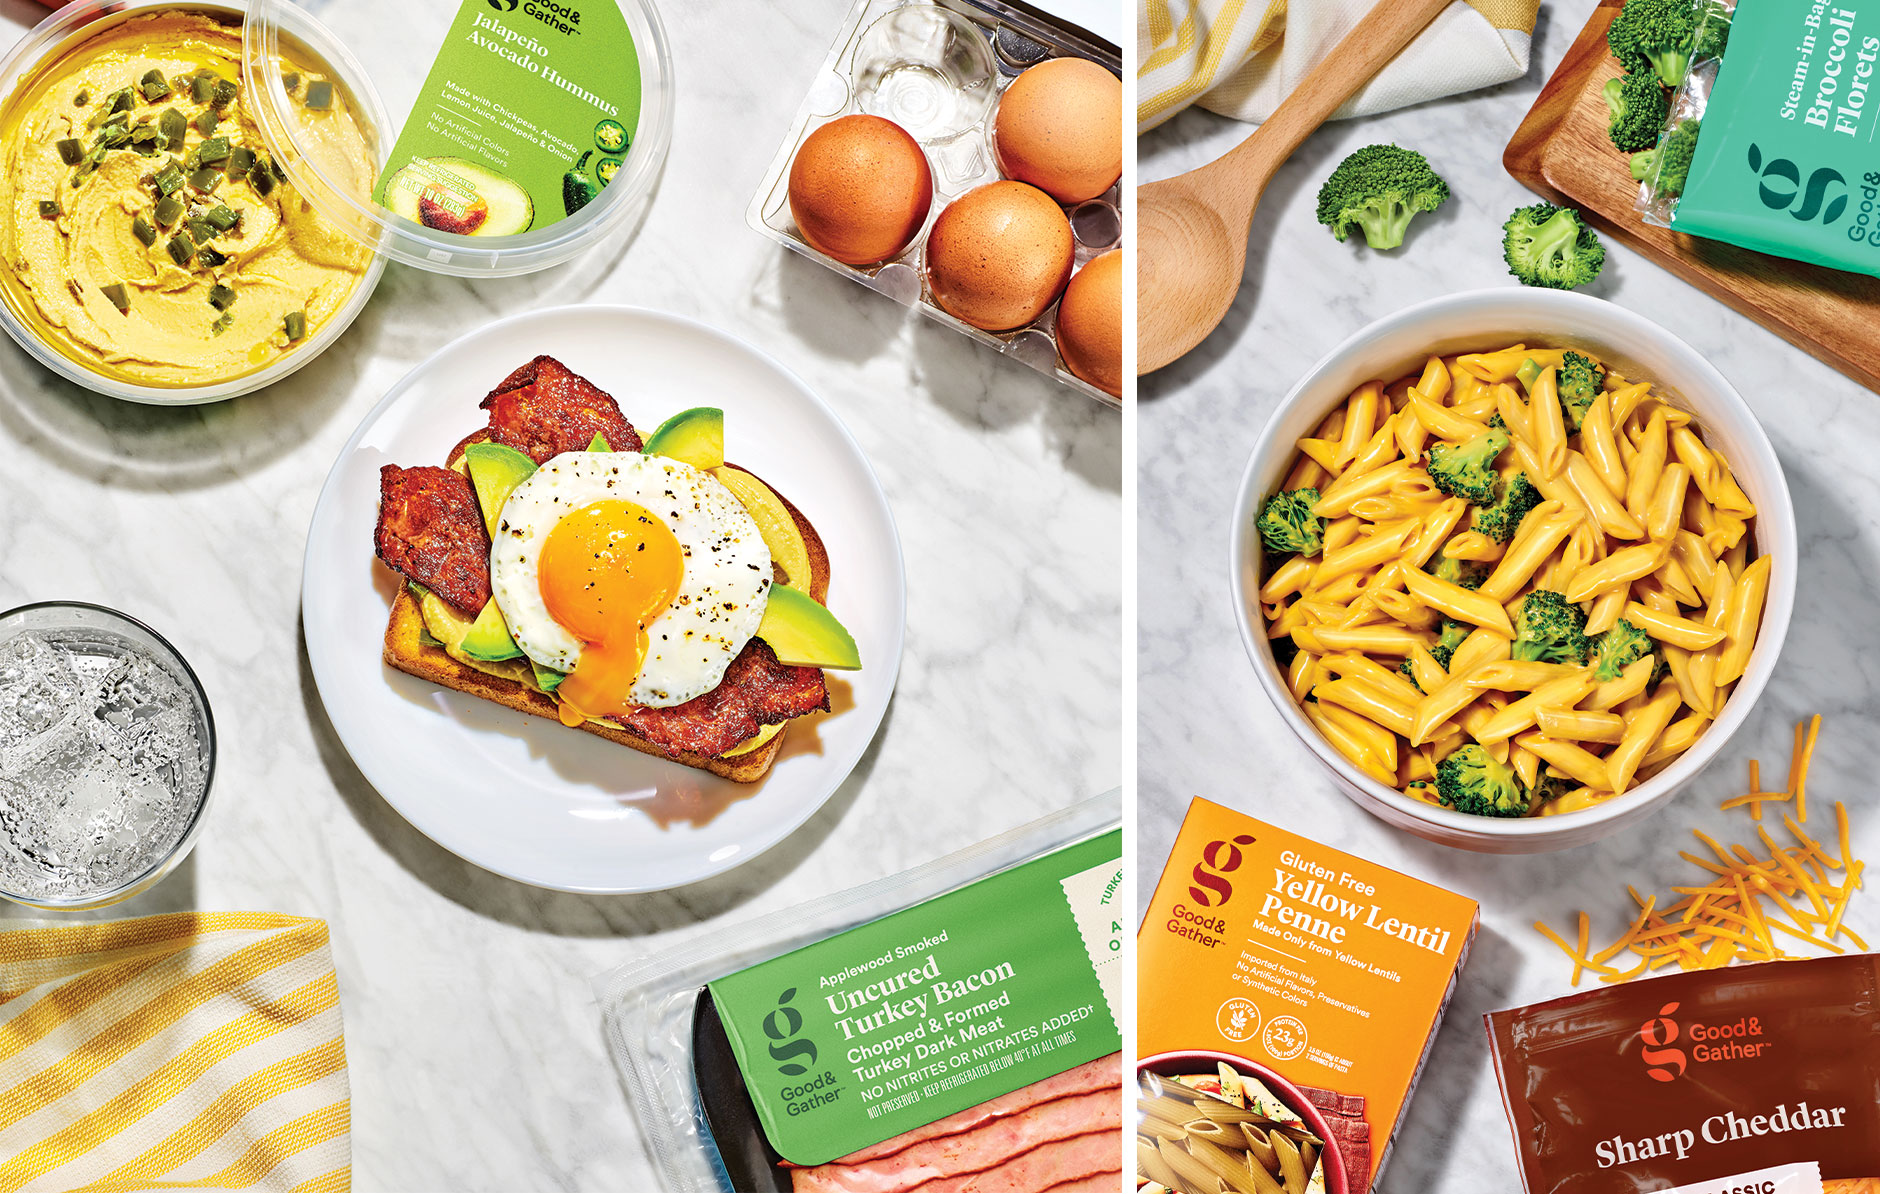 Two lifestyle images show Good and Gather products used to make a breakfast sandwich with hummus, eggs and turkey bacon and a bowl of mac n' cheese with broccoli